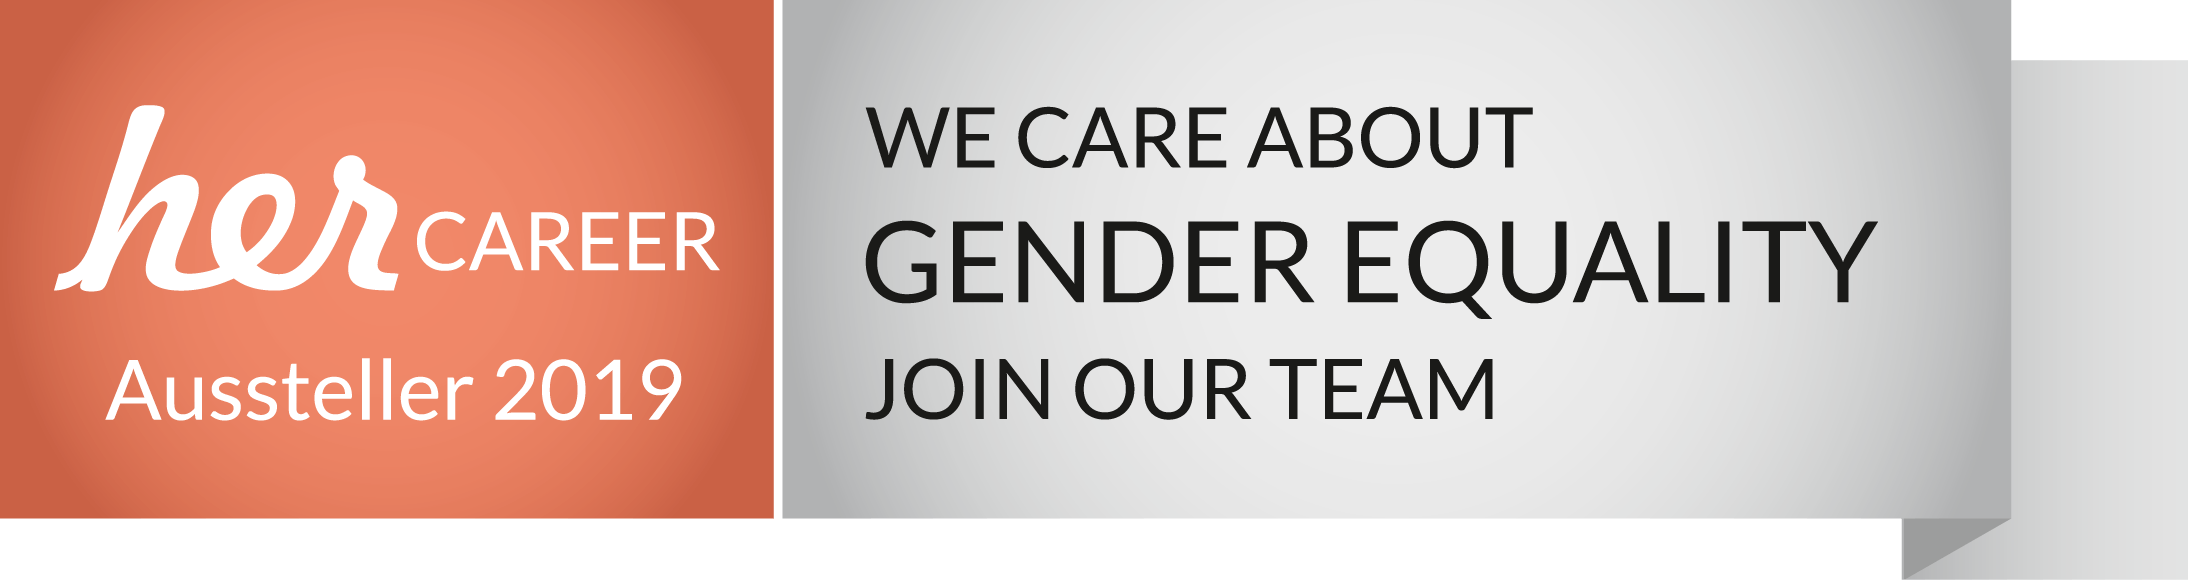 her career Aussteller 2019: We care about gender equality - join our team!